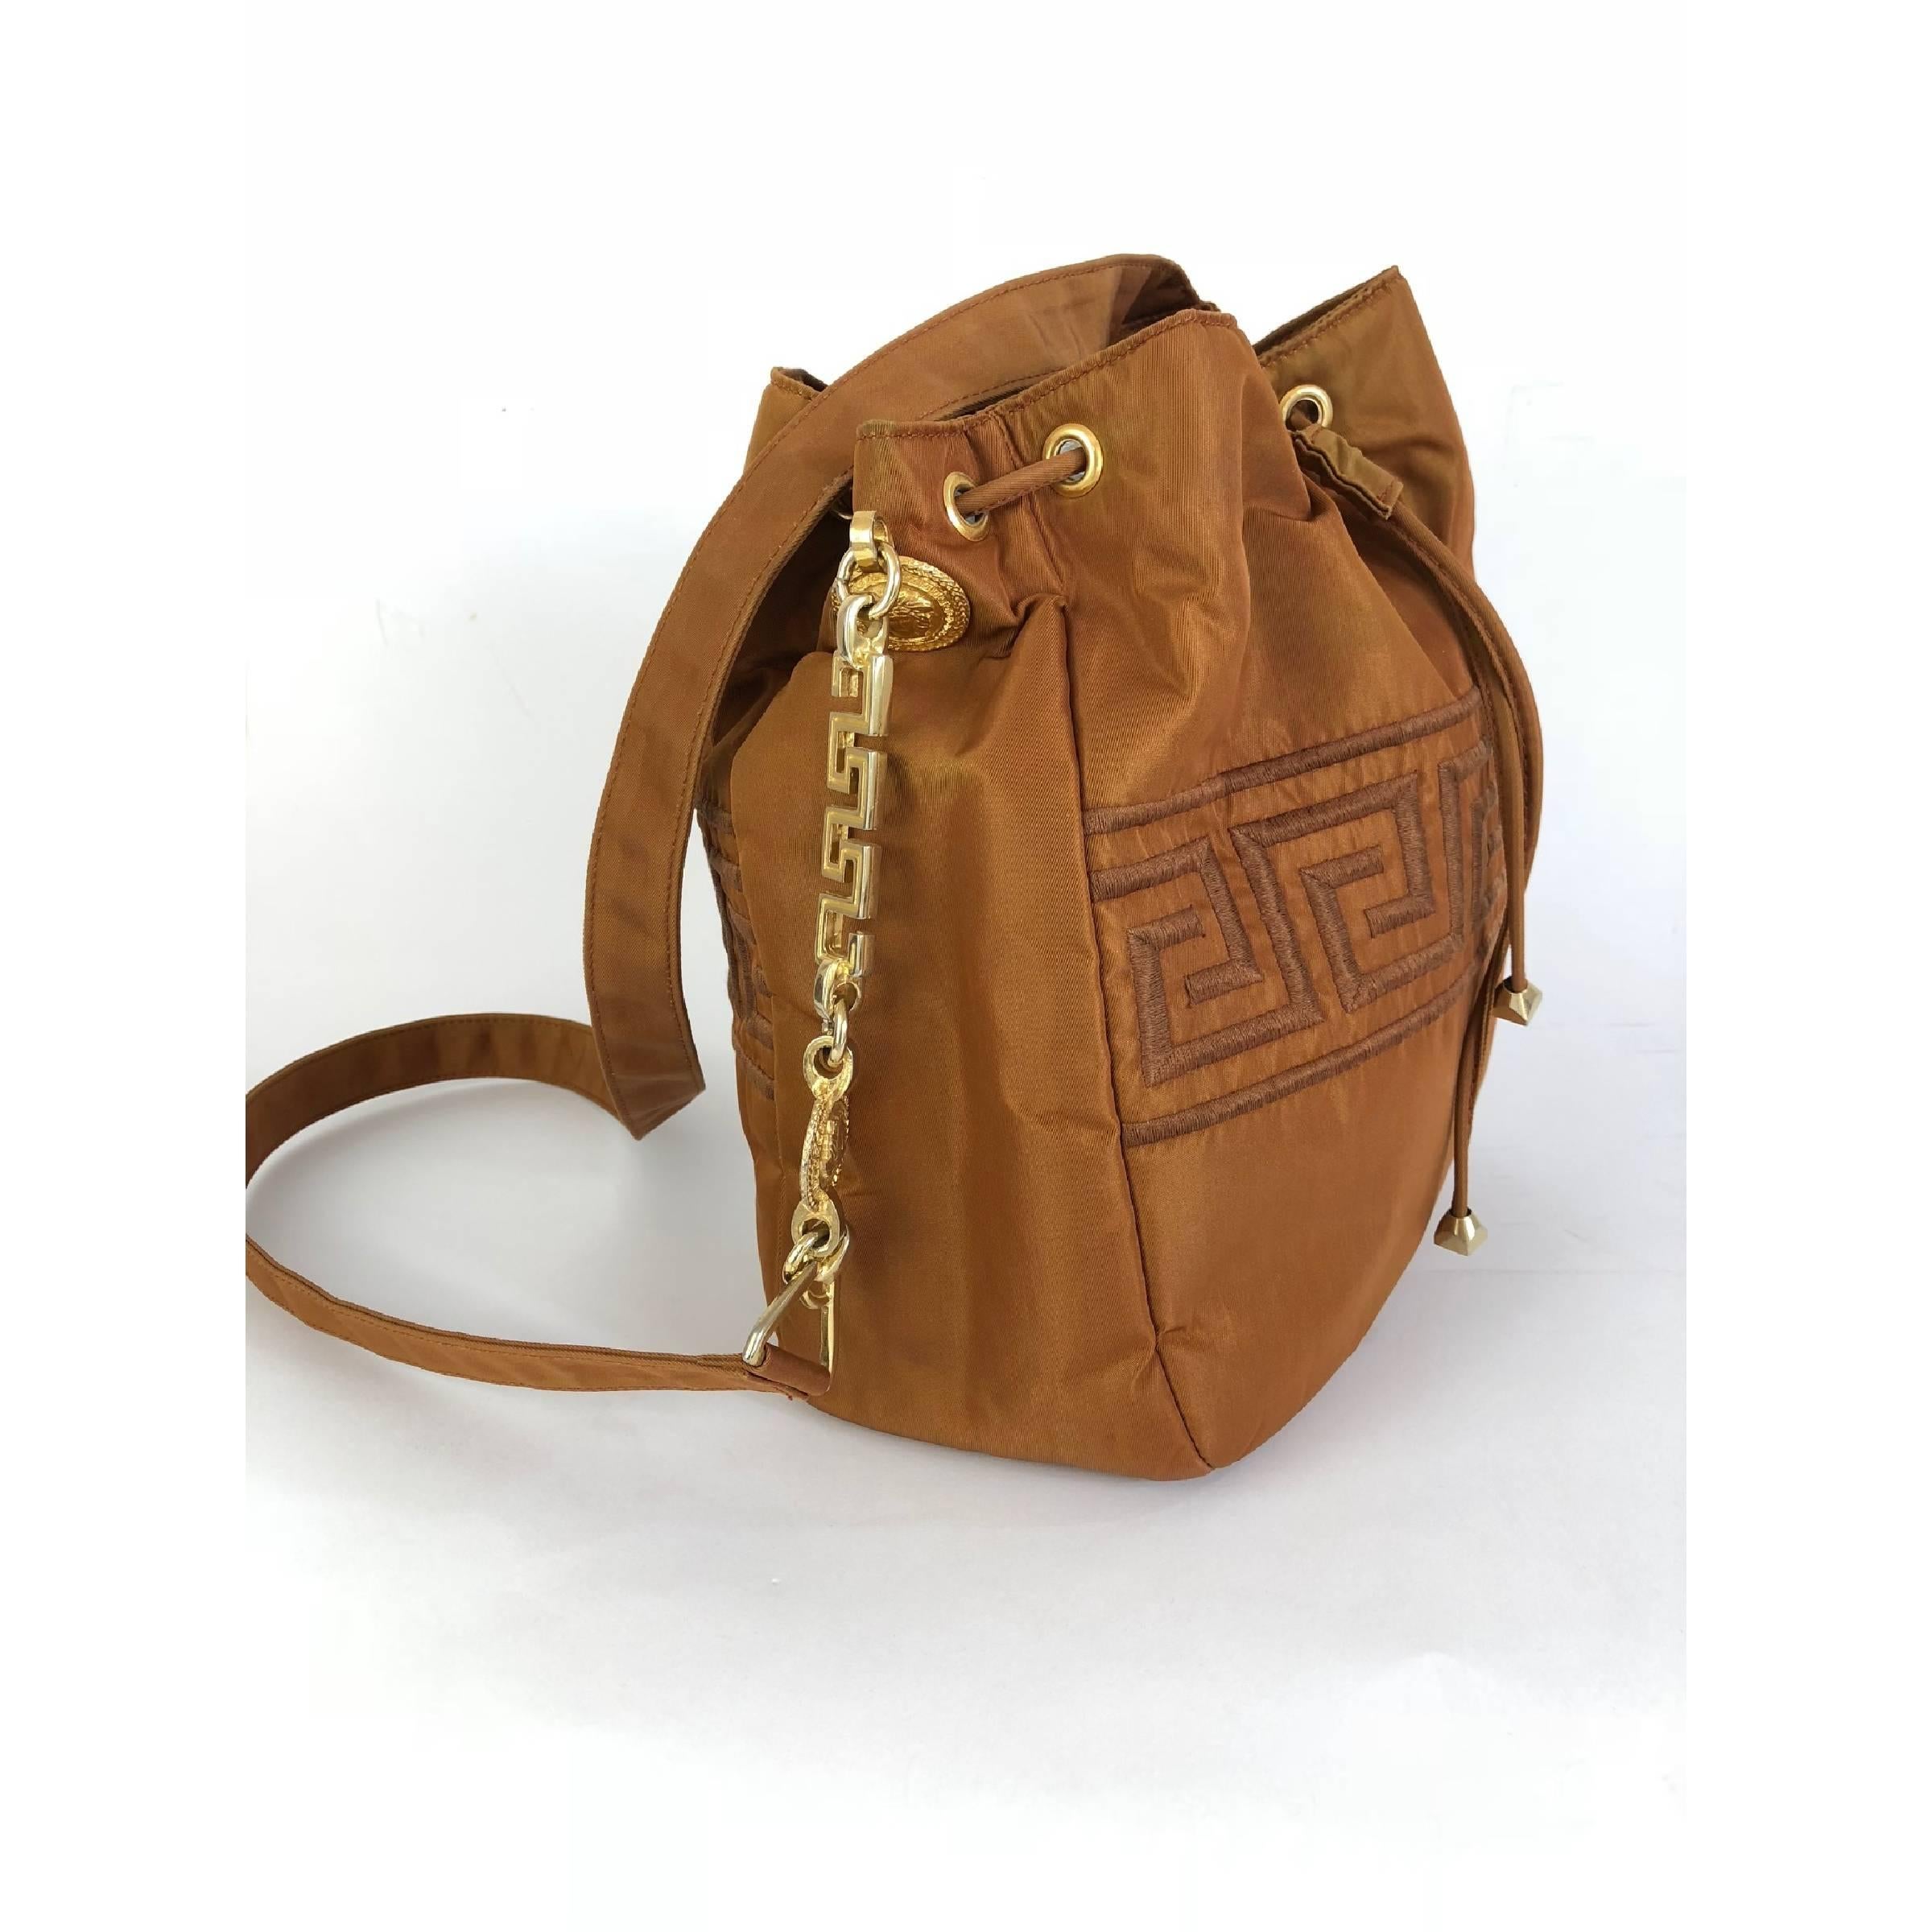 Gianni Versace bucket bag. Brown, satin-like material. Closure with drawstring, inside a small pocket and internal lining with logo. Gold-colored details with medallions depicting the jellyfish along the shoulder strap. There are some small stains